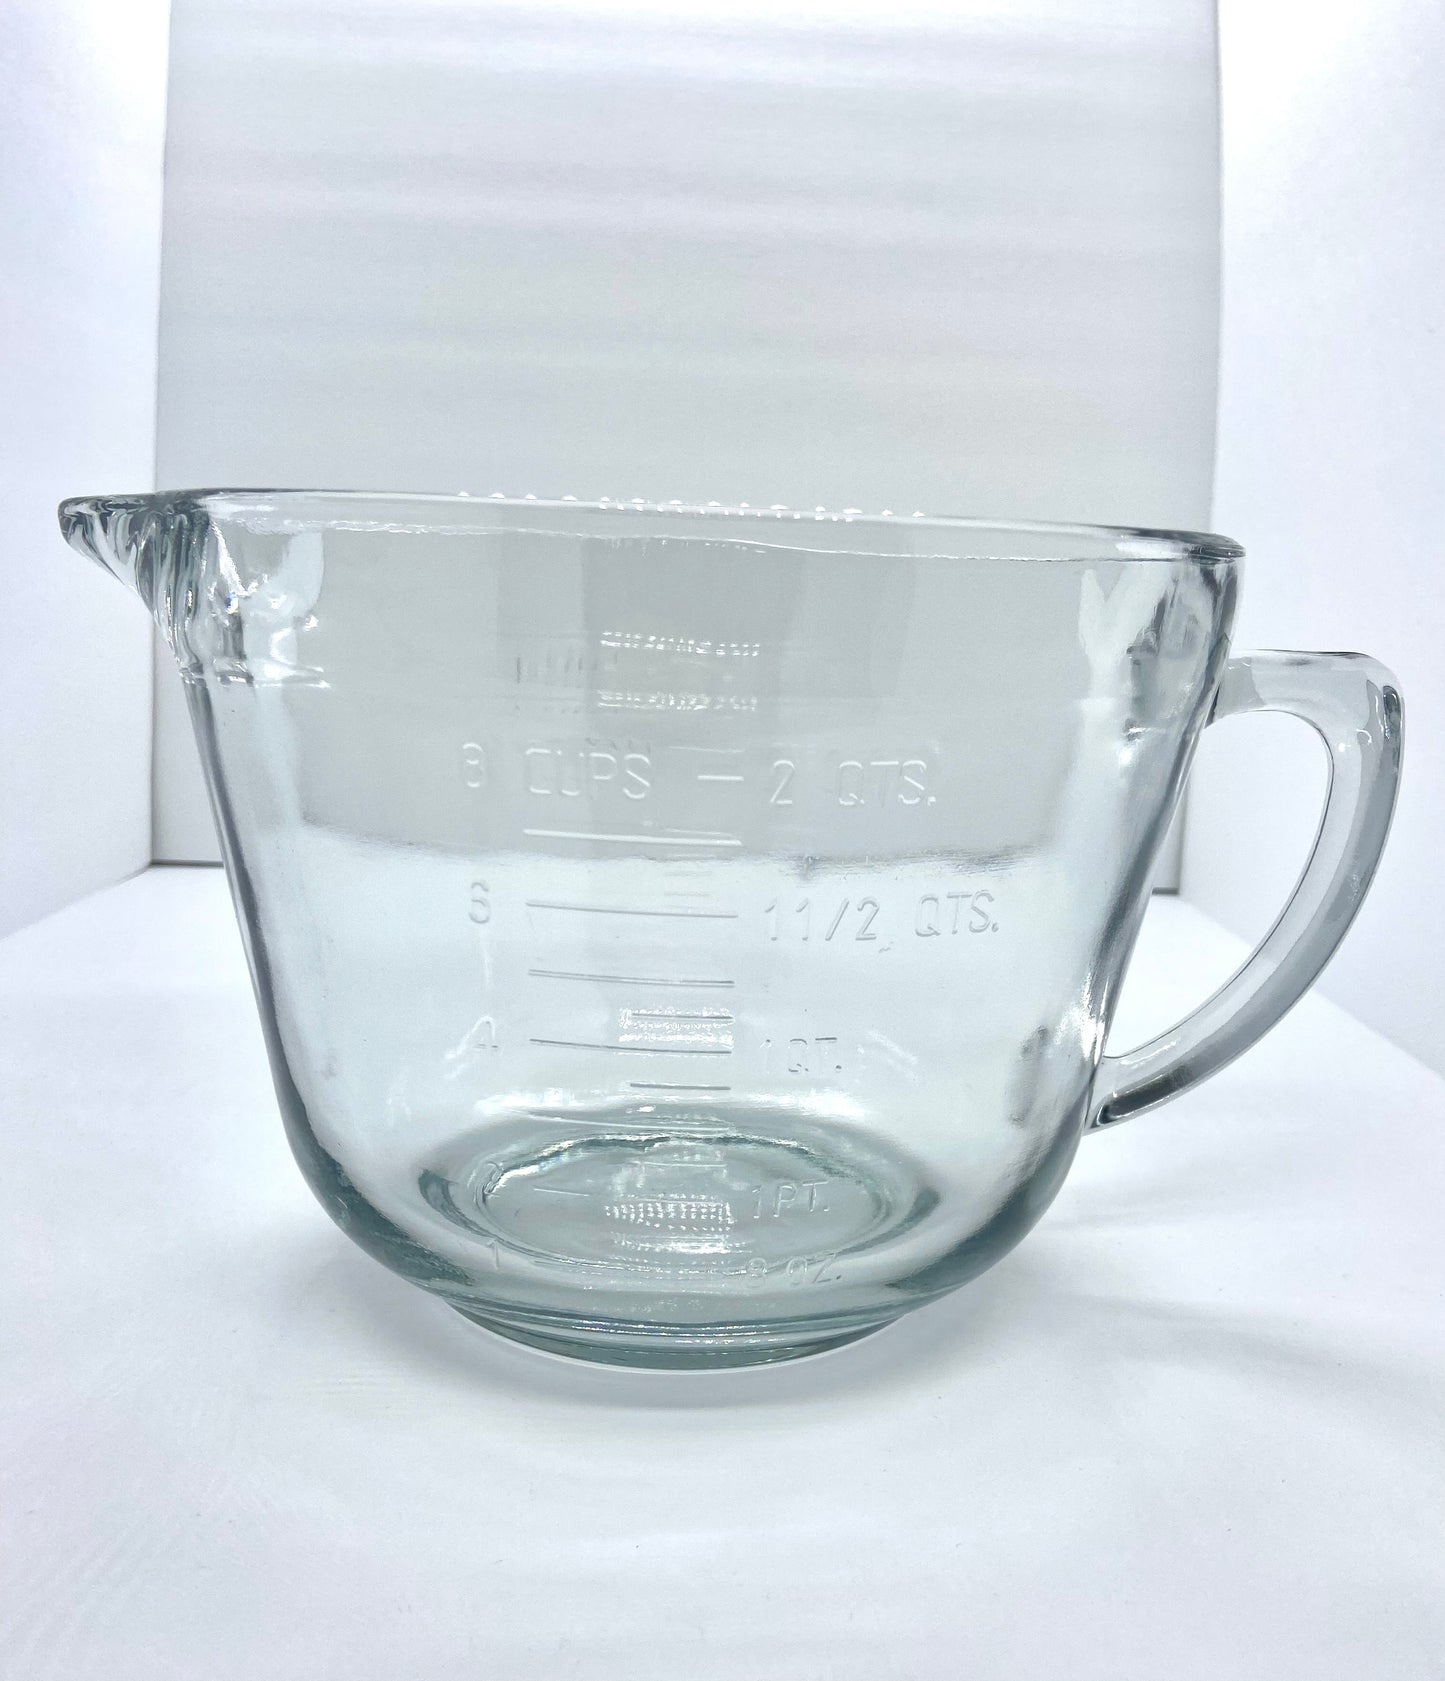 Anchor Hocking Fire King Glass Measuring Cup - 2 Cup